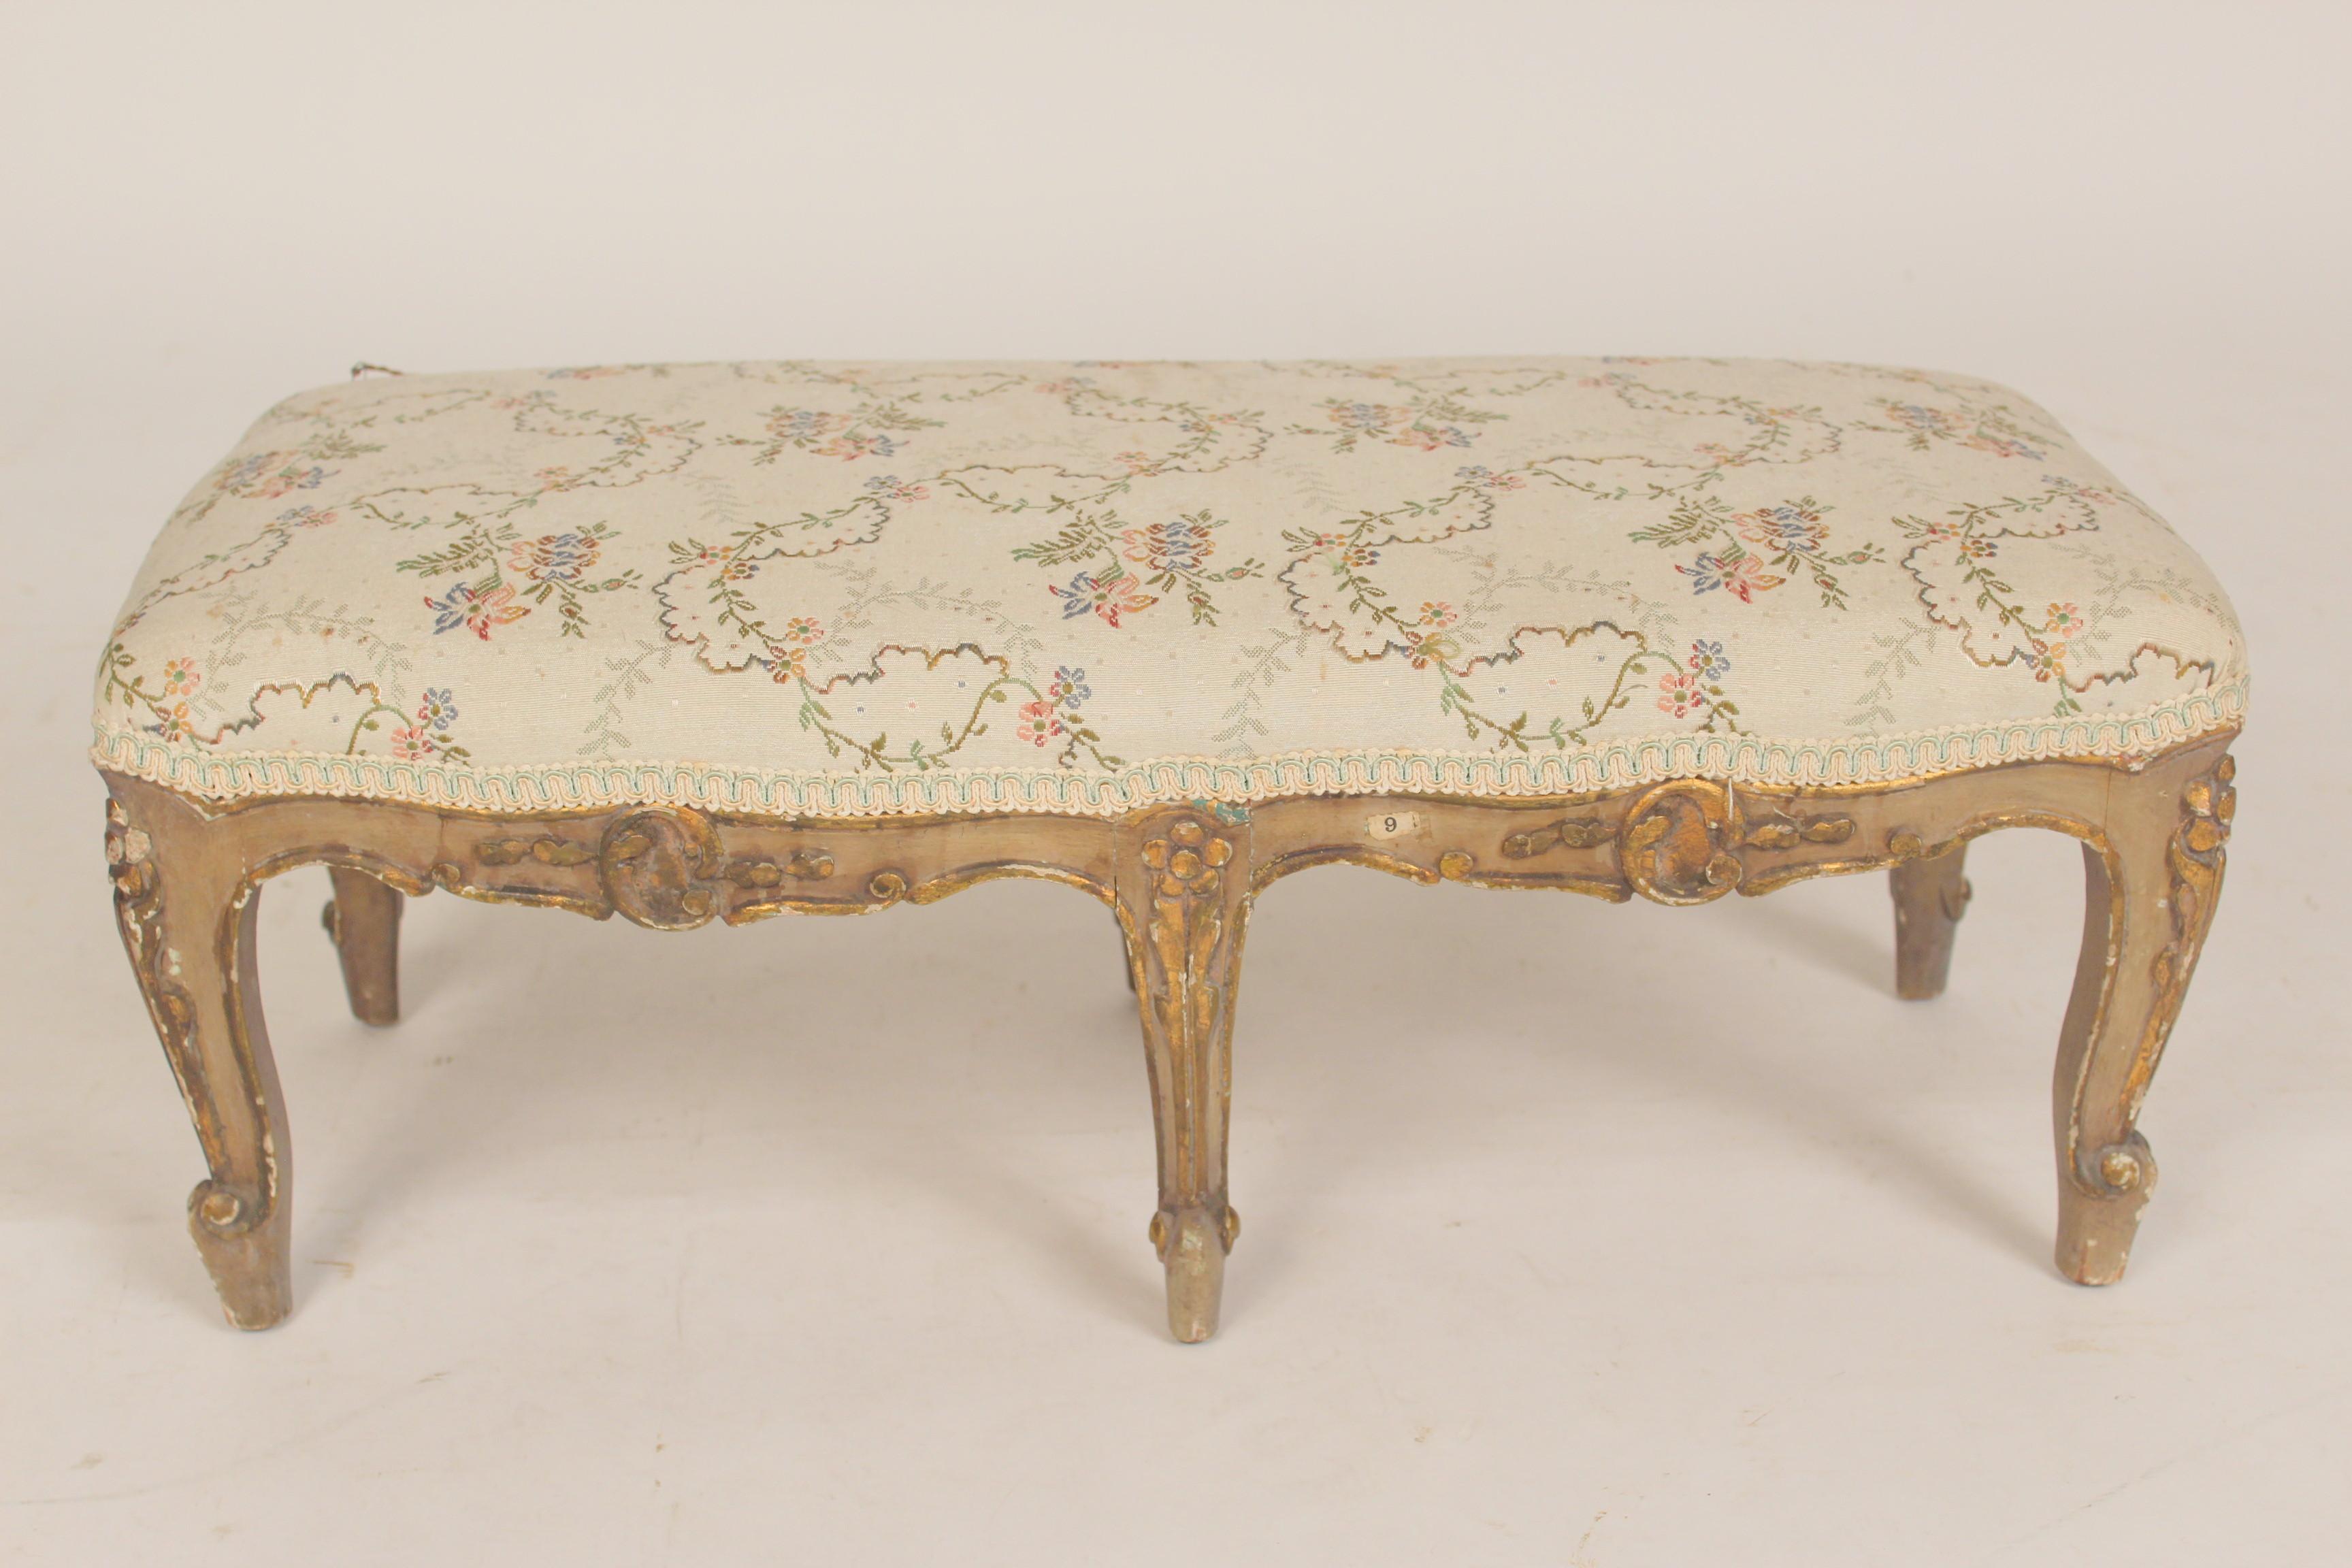 Louis XV style painted and gilt decorated 6 leg footstool, circa 1920. With old original paint.